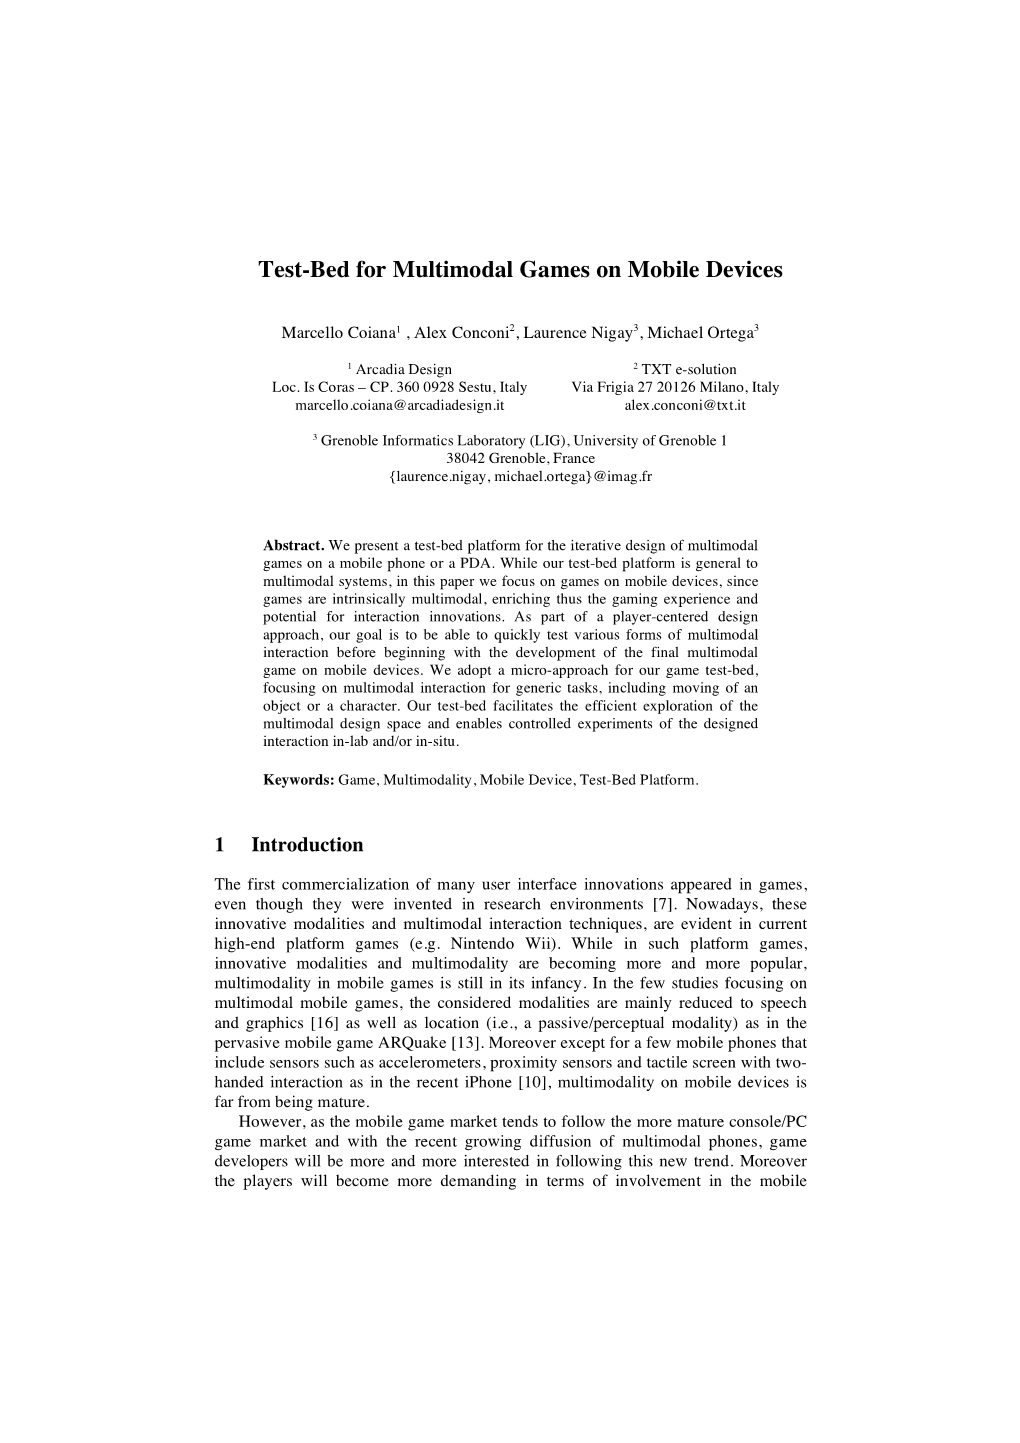 Test-Bed for Multimodal Games on Mobile Devices